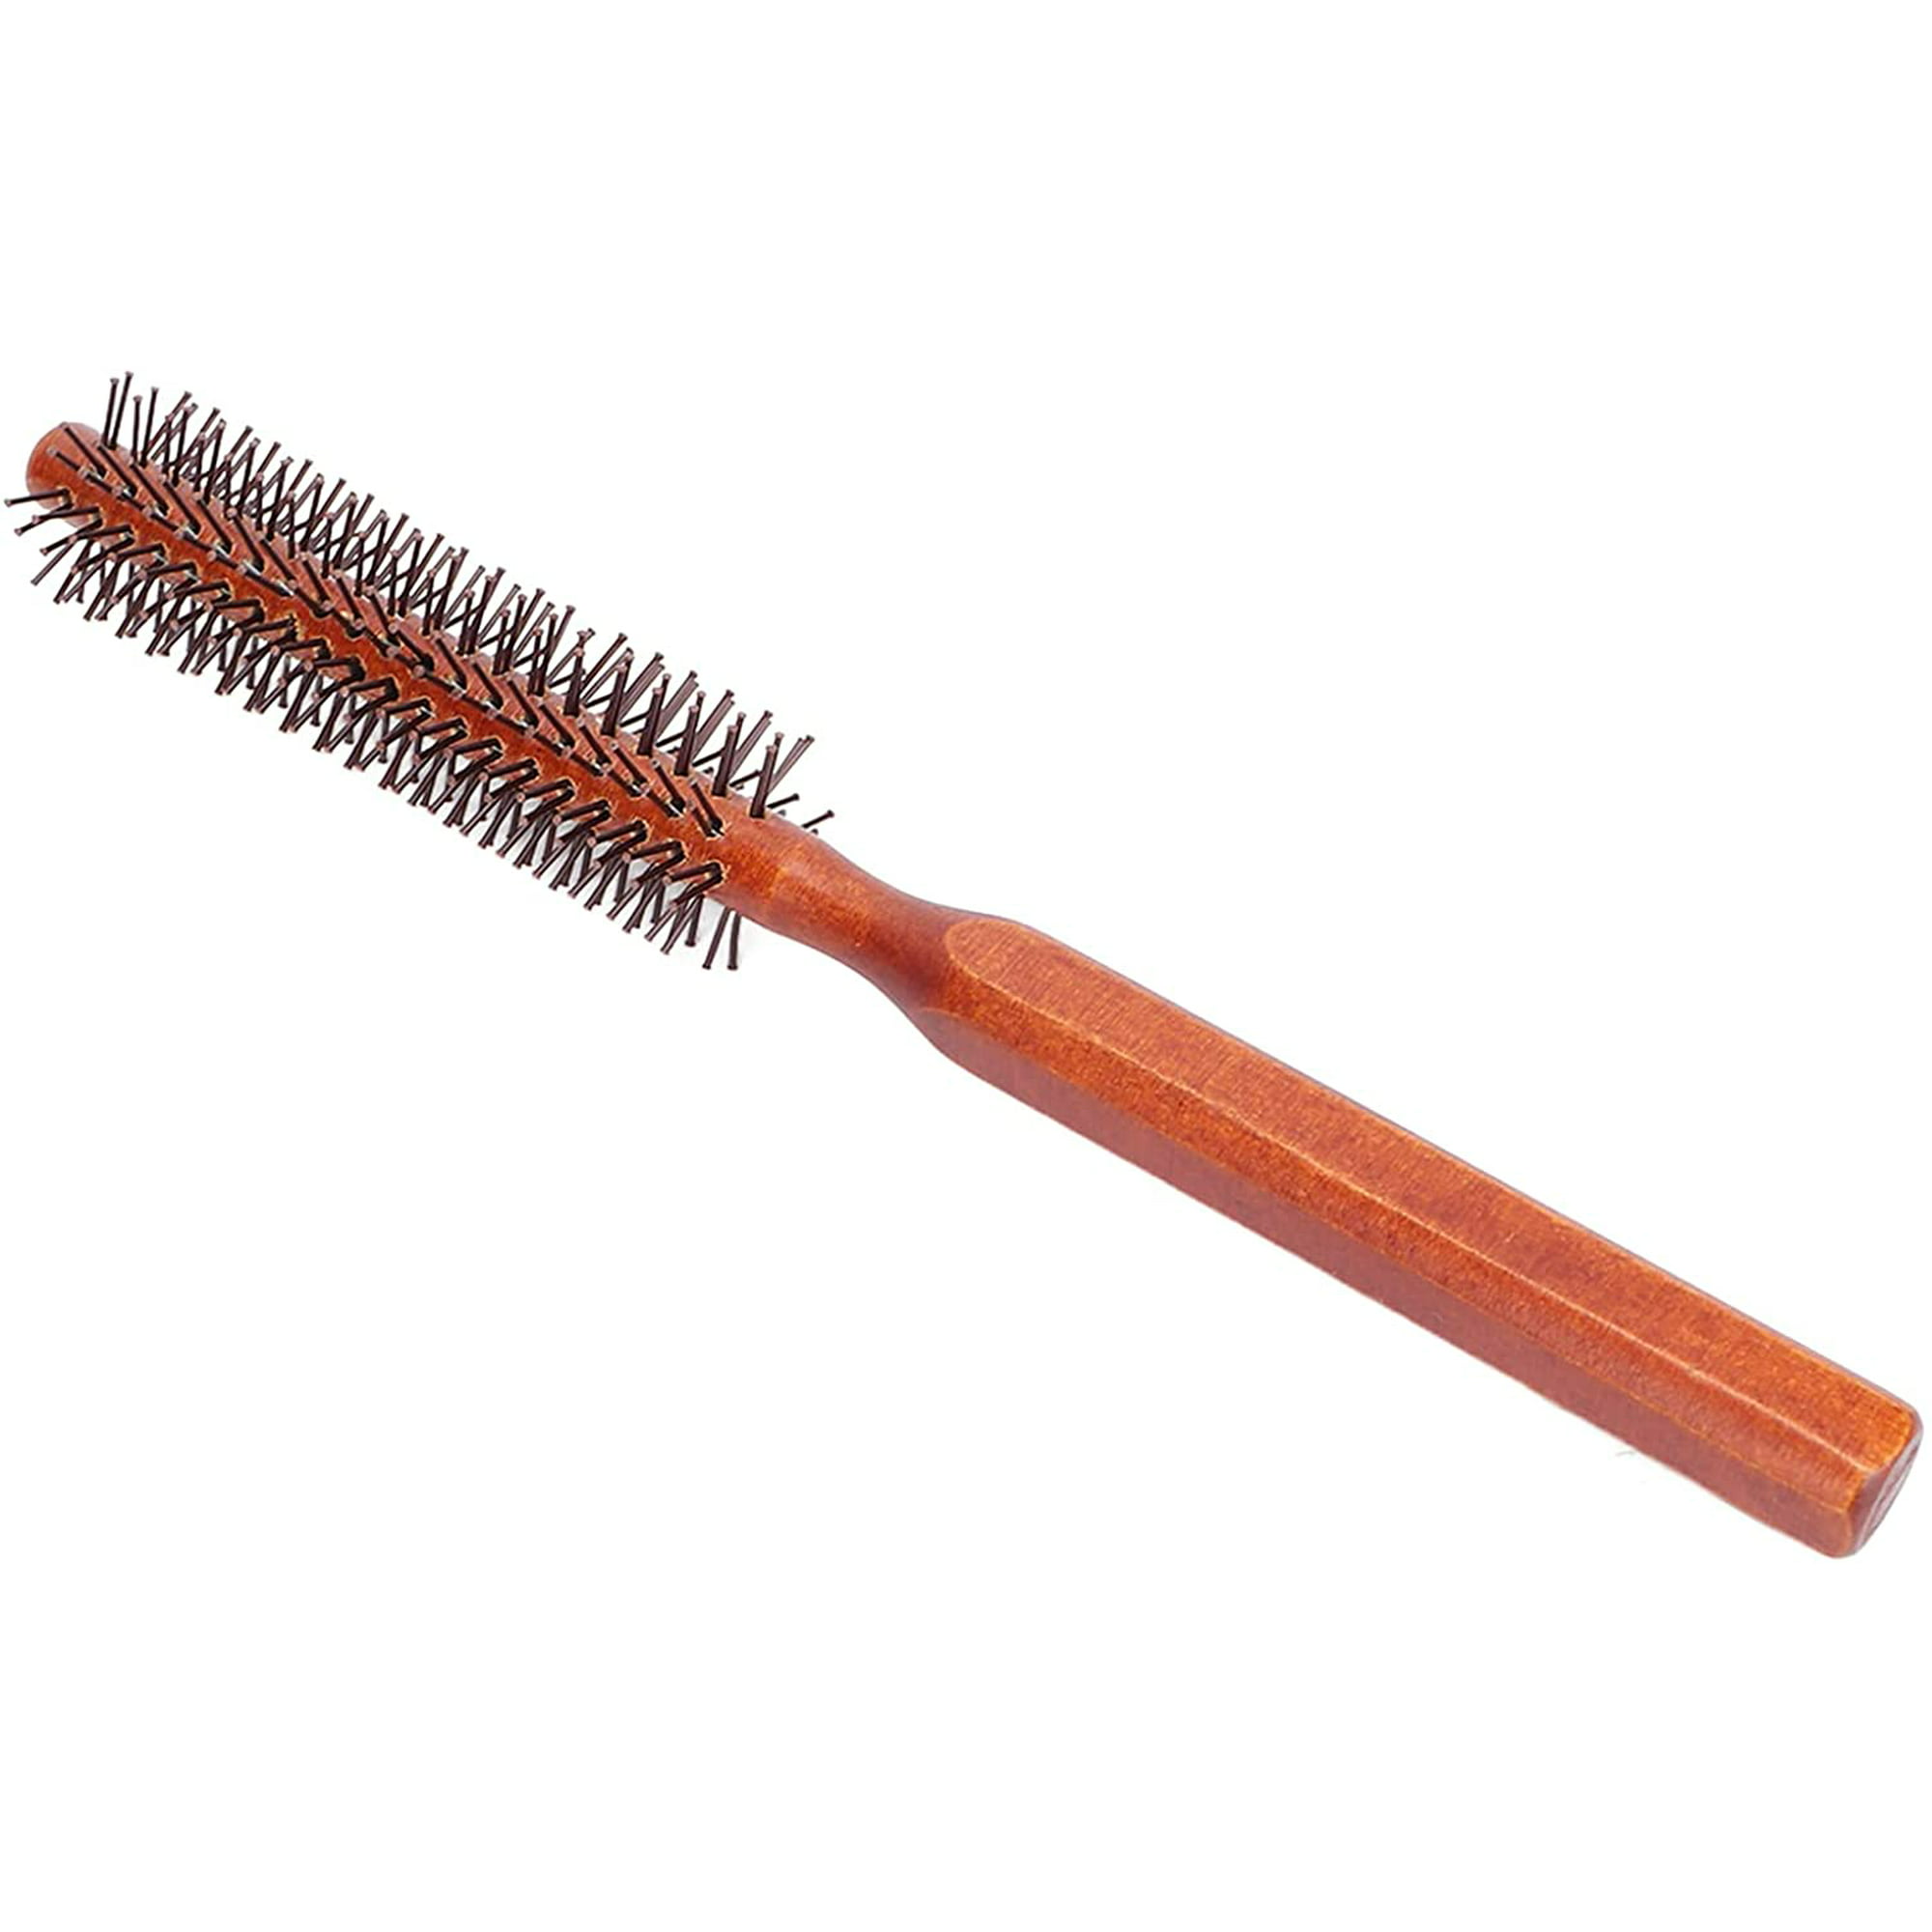 Round Brush for Short Hair, Round Styling Hair Brush Curling Roller  Hairbrush Small Wood Brush, Unisex Round Wooden Hair Styling Tool Curling  Hair Brush for Blow Drying Home Use | Walmart Canada